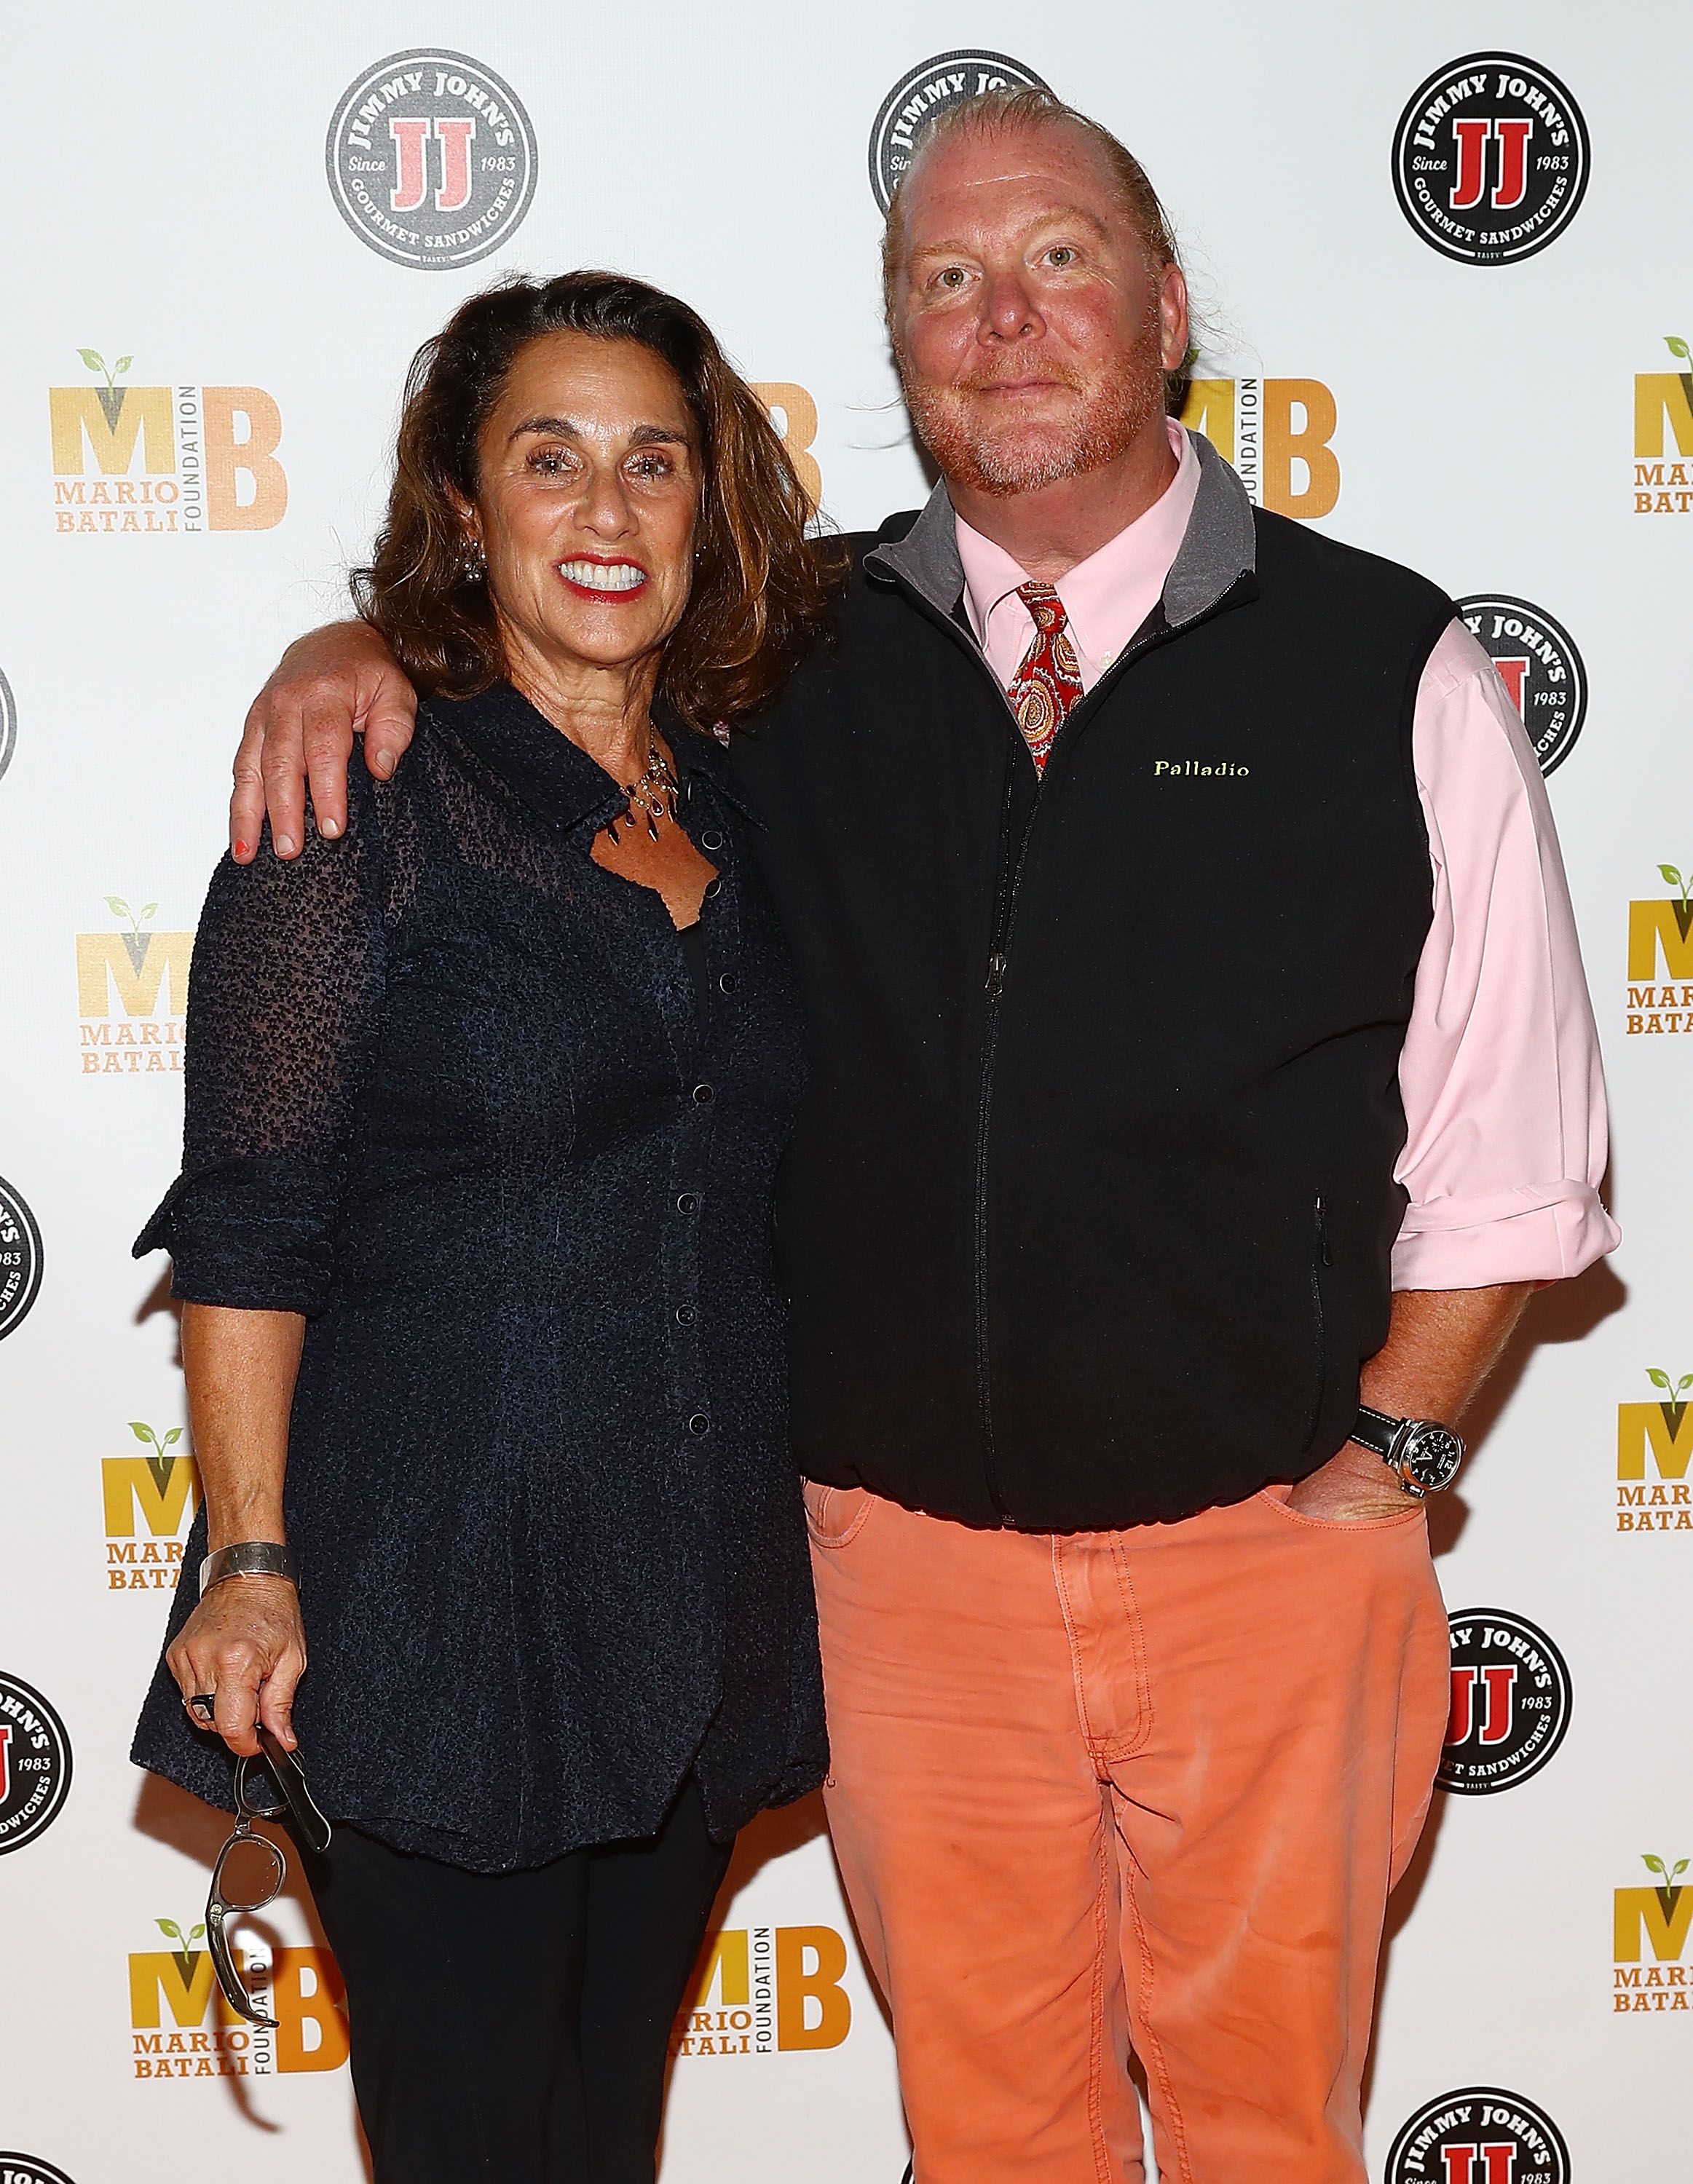 Who Is Mario Batali's Wife? - Who Is Susan Cahn?